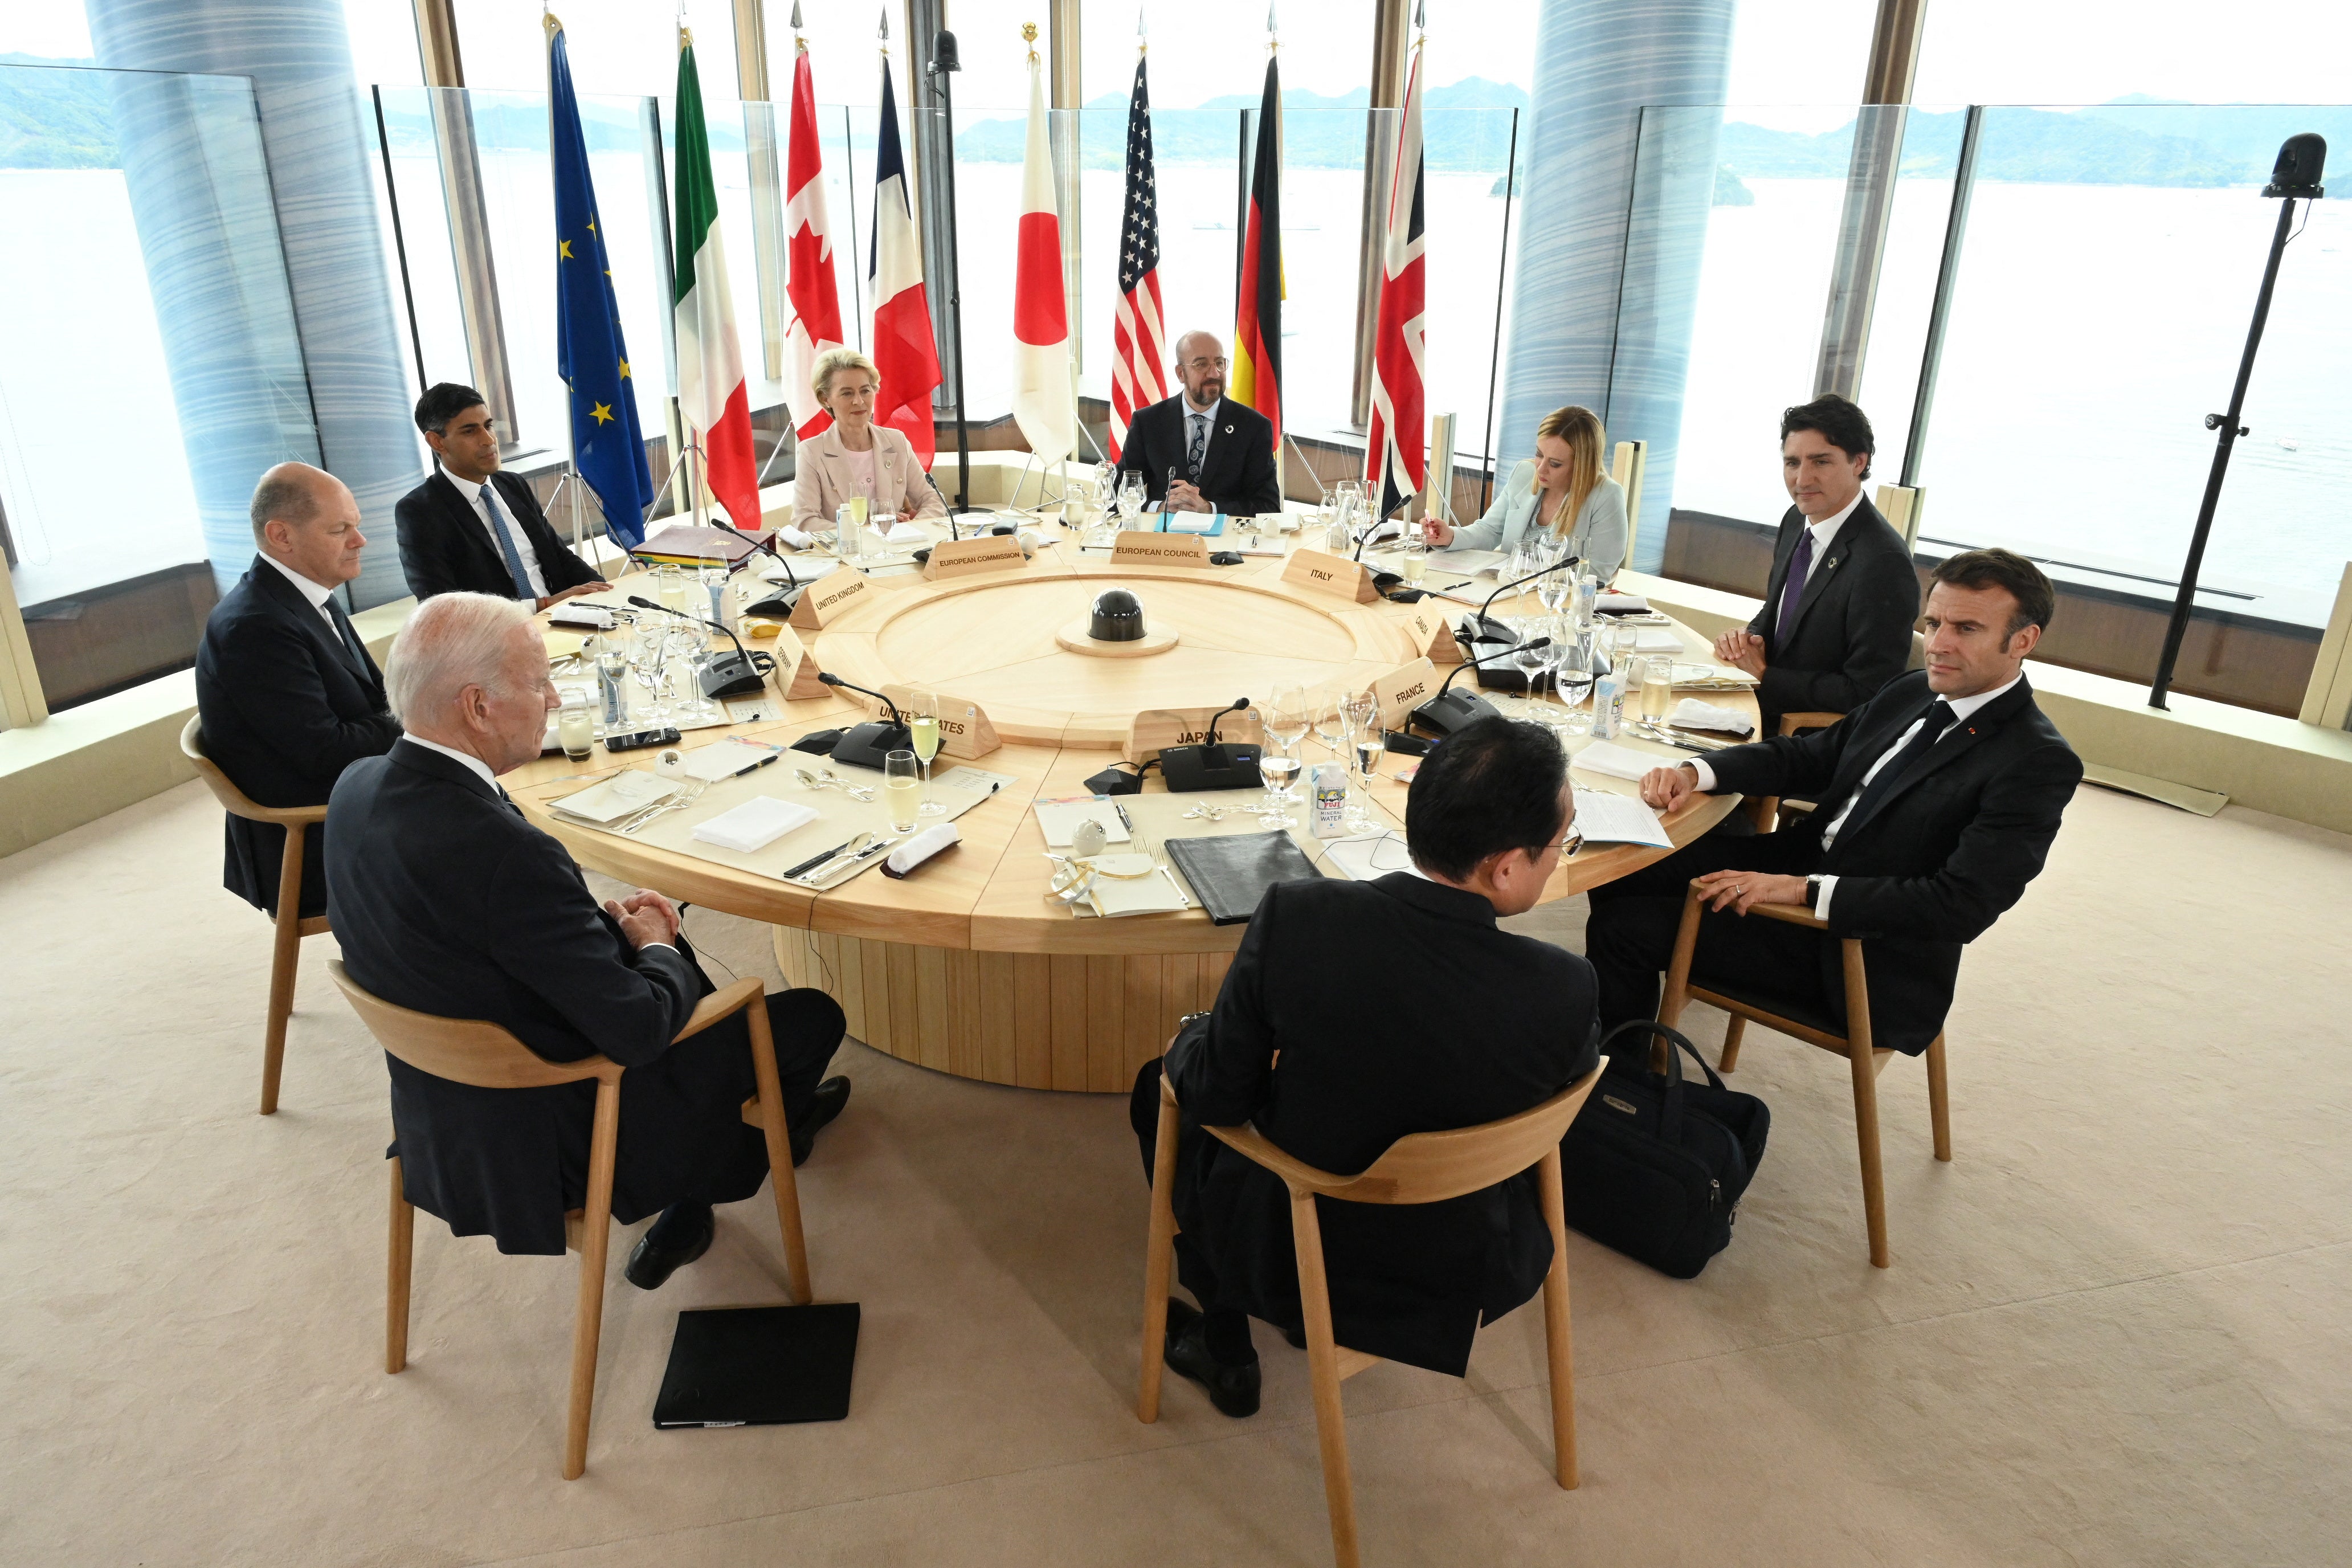 a working lunch meeting at G7 leaders' summit in Hiroshima, western Japan